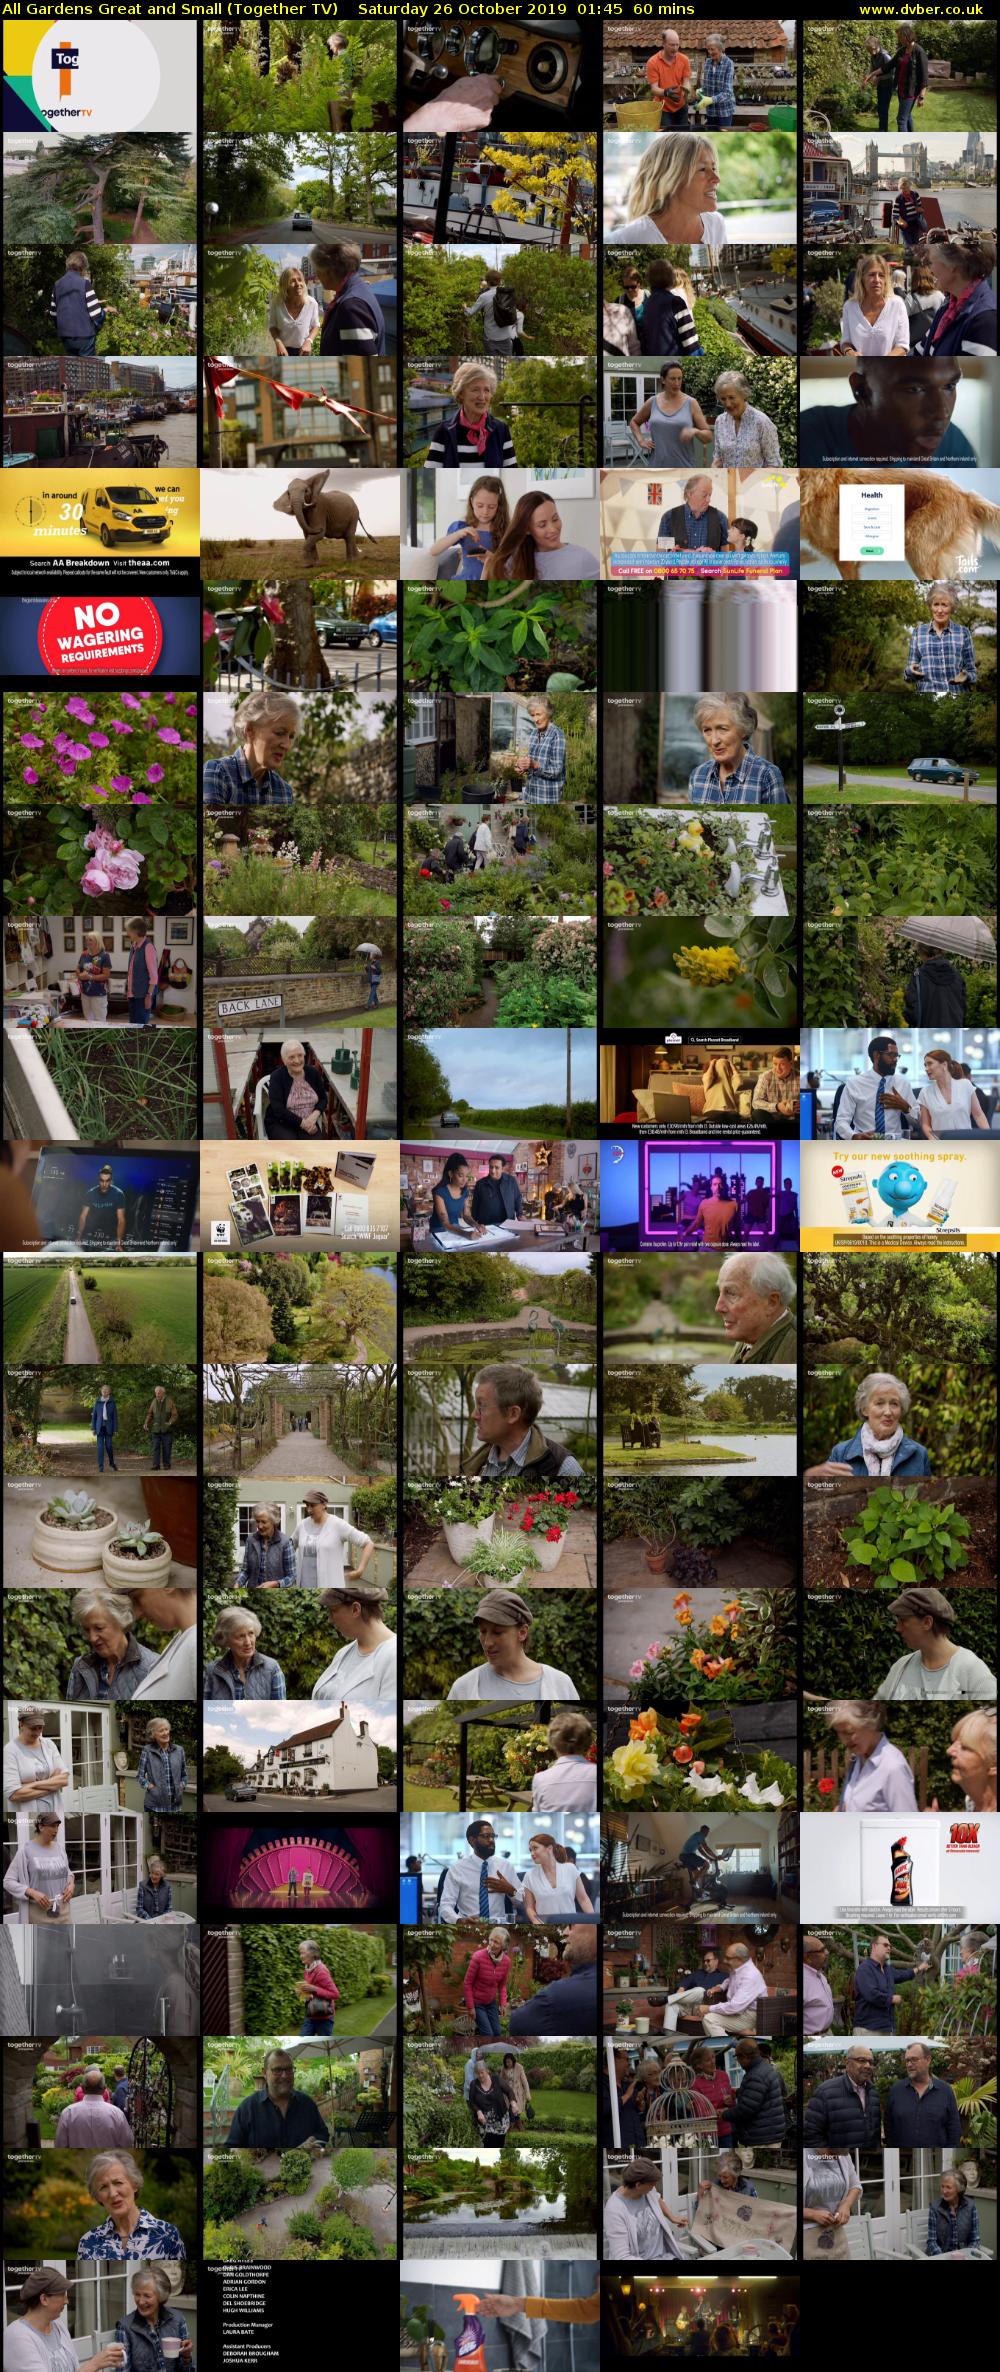 All Gardens Great and Small (Together TV) Saturday 26 October 2019 01:45 - 02:45